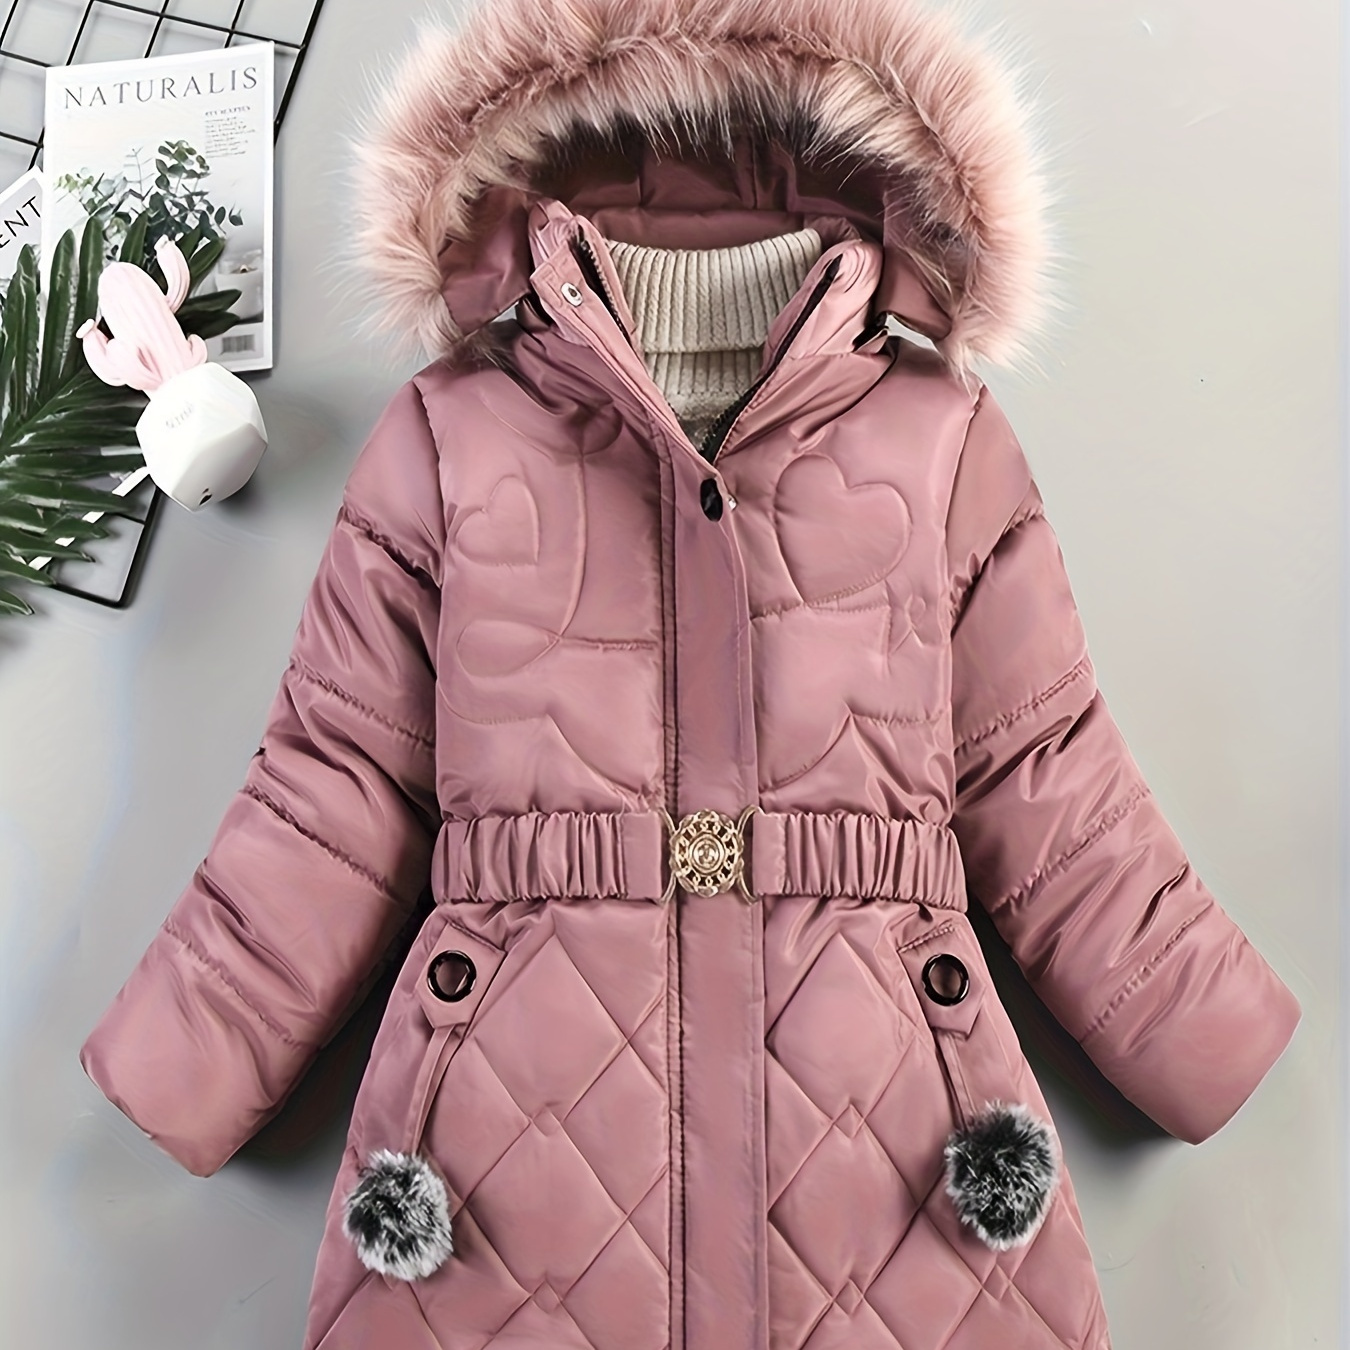 

Winter Snow Suit For Girls, Fur Collar & Tunic Details Warm Cotton-padded Hooded Coat, Kids Outerwear